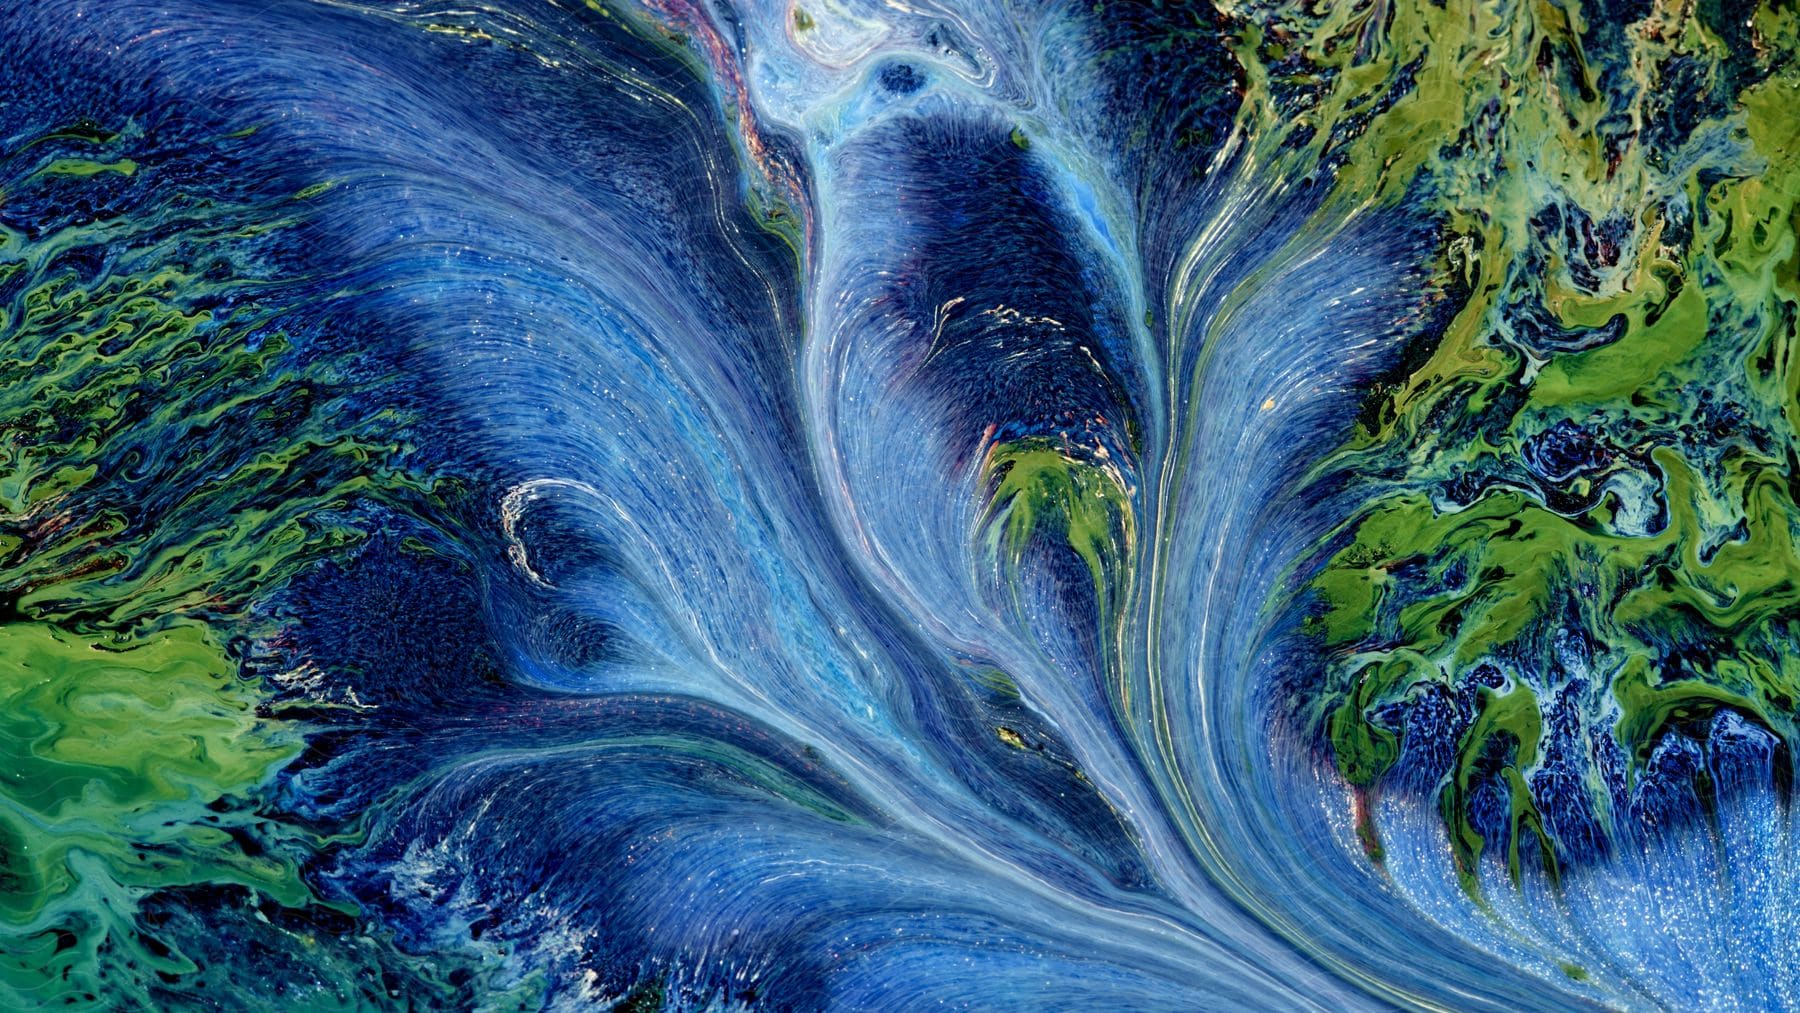 An abstract mixture of blue and green colors resembling miniature landscapes created with paint on a piece of paper